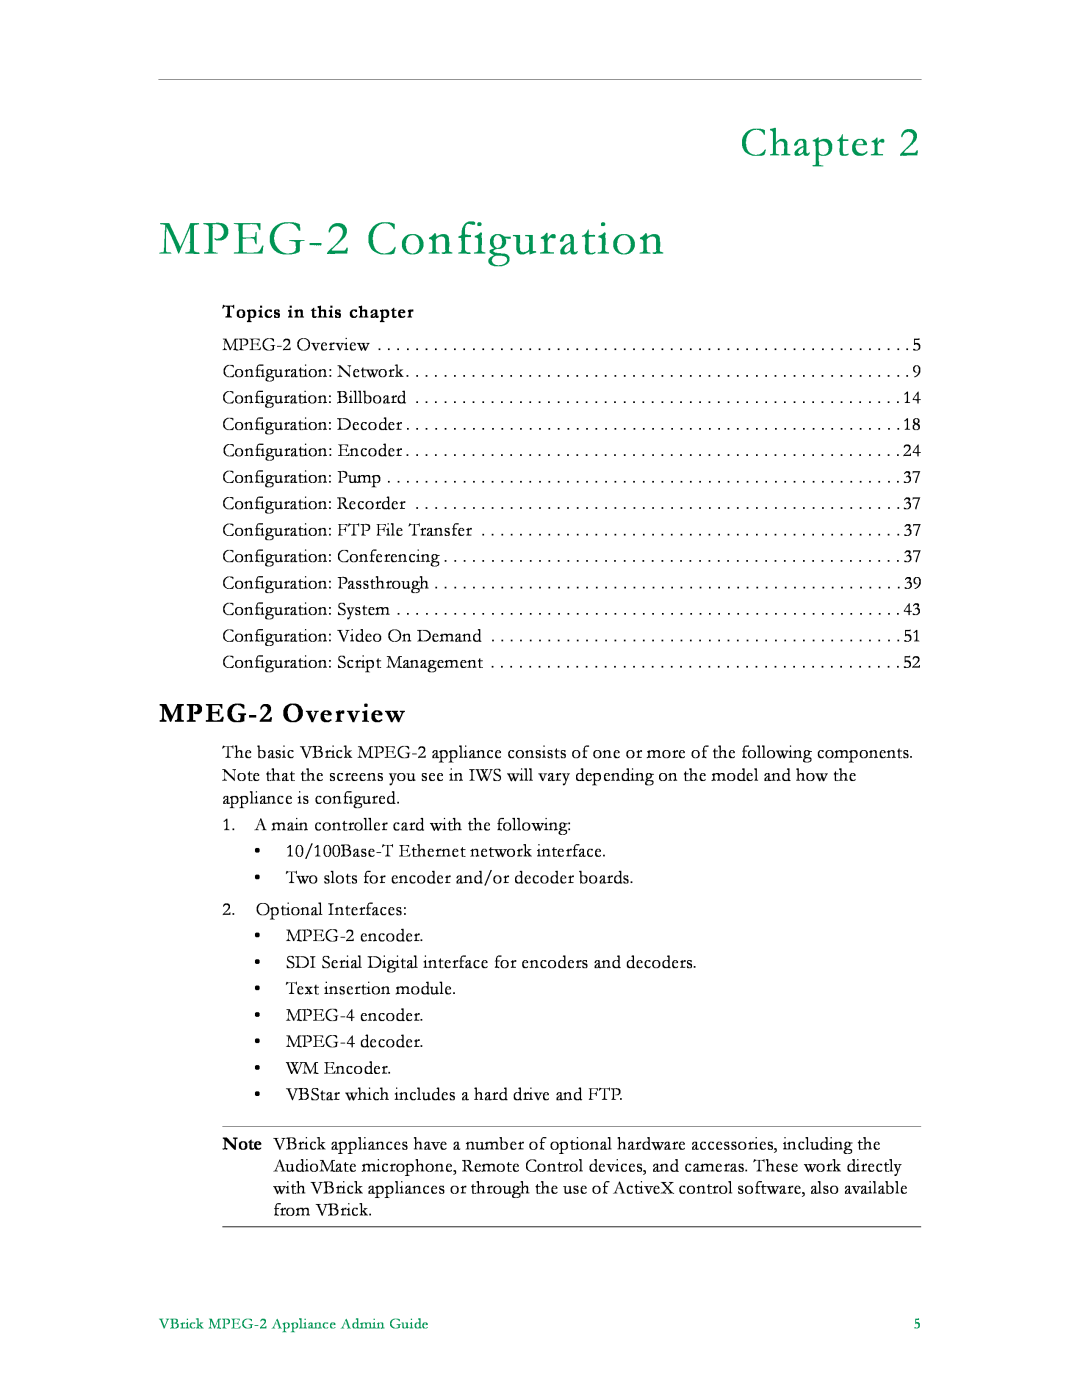 VBrick Systems VB4000, VB6000, VB5000 manual MPEG-2 Configuration, MPEG-2 Overview, Chapter, Topics in this chapter 